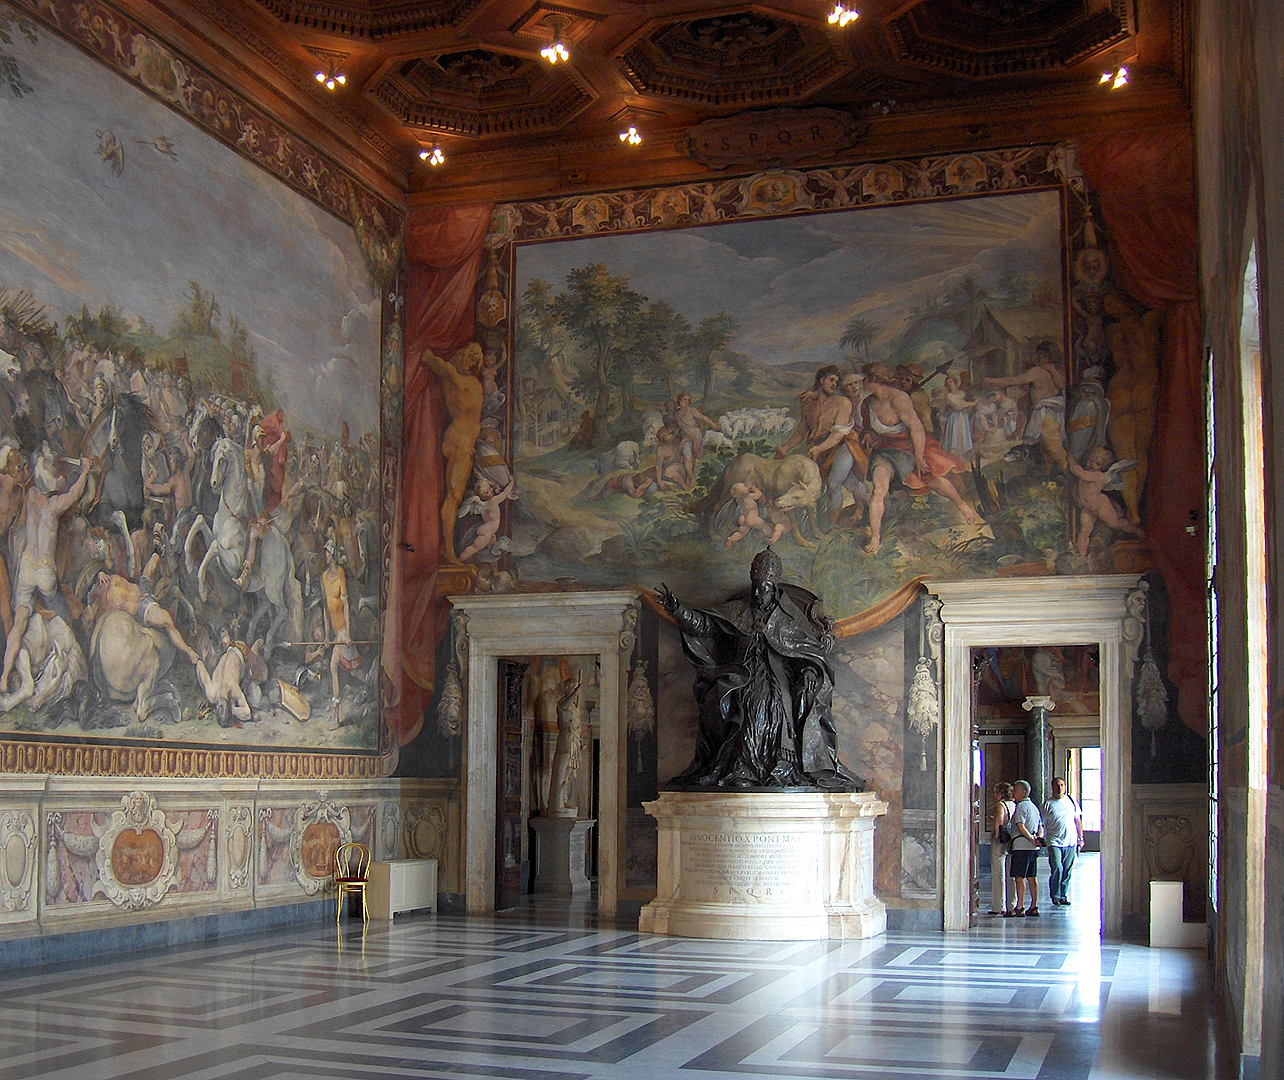 Hal van de Horatii and Curiatii (Rome); Hall of the Horatii and Curiatii